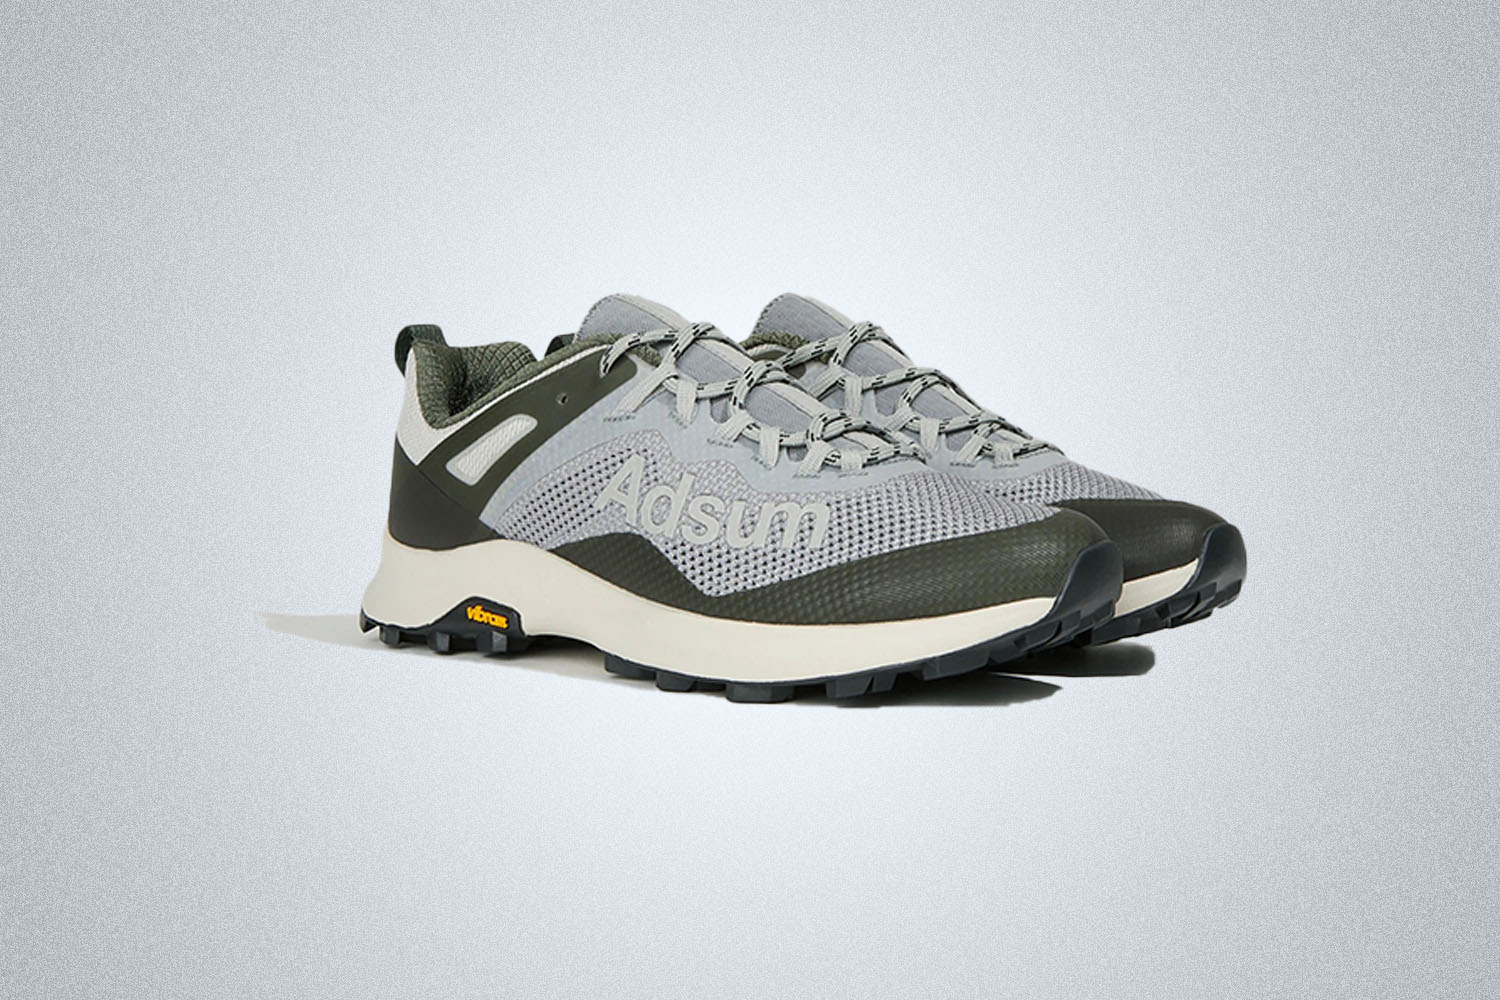 A pair of gray Merrell trail running shoes with Adsum branding on a gray background